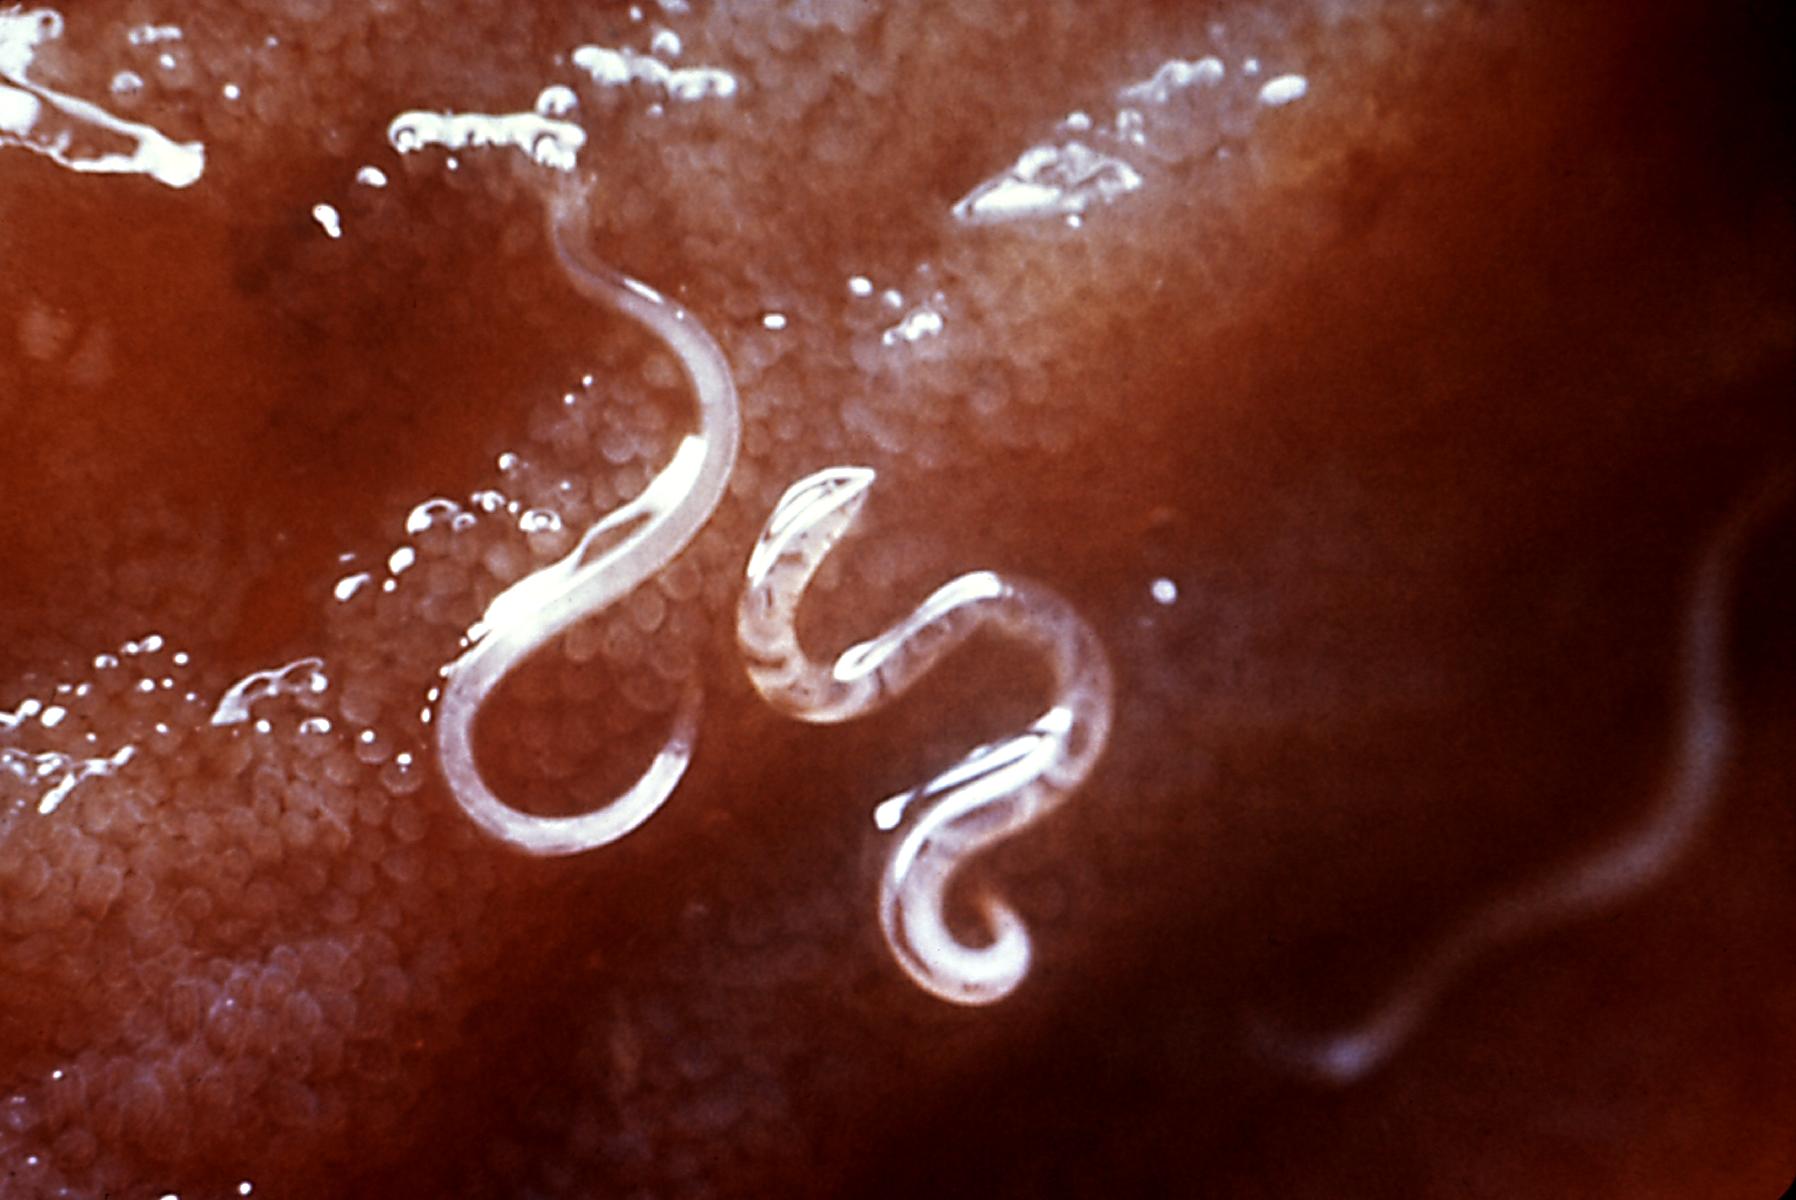 Intestinal Parasites In Humans Images